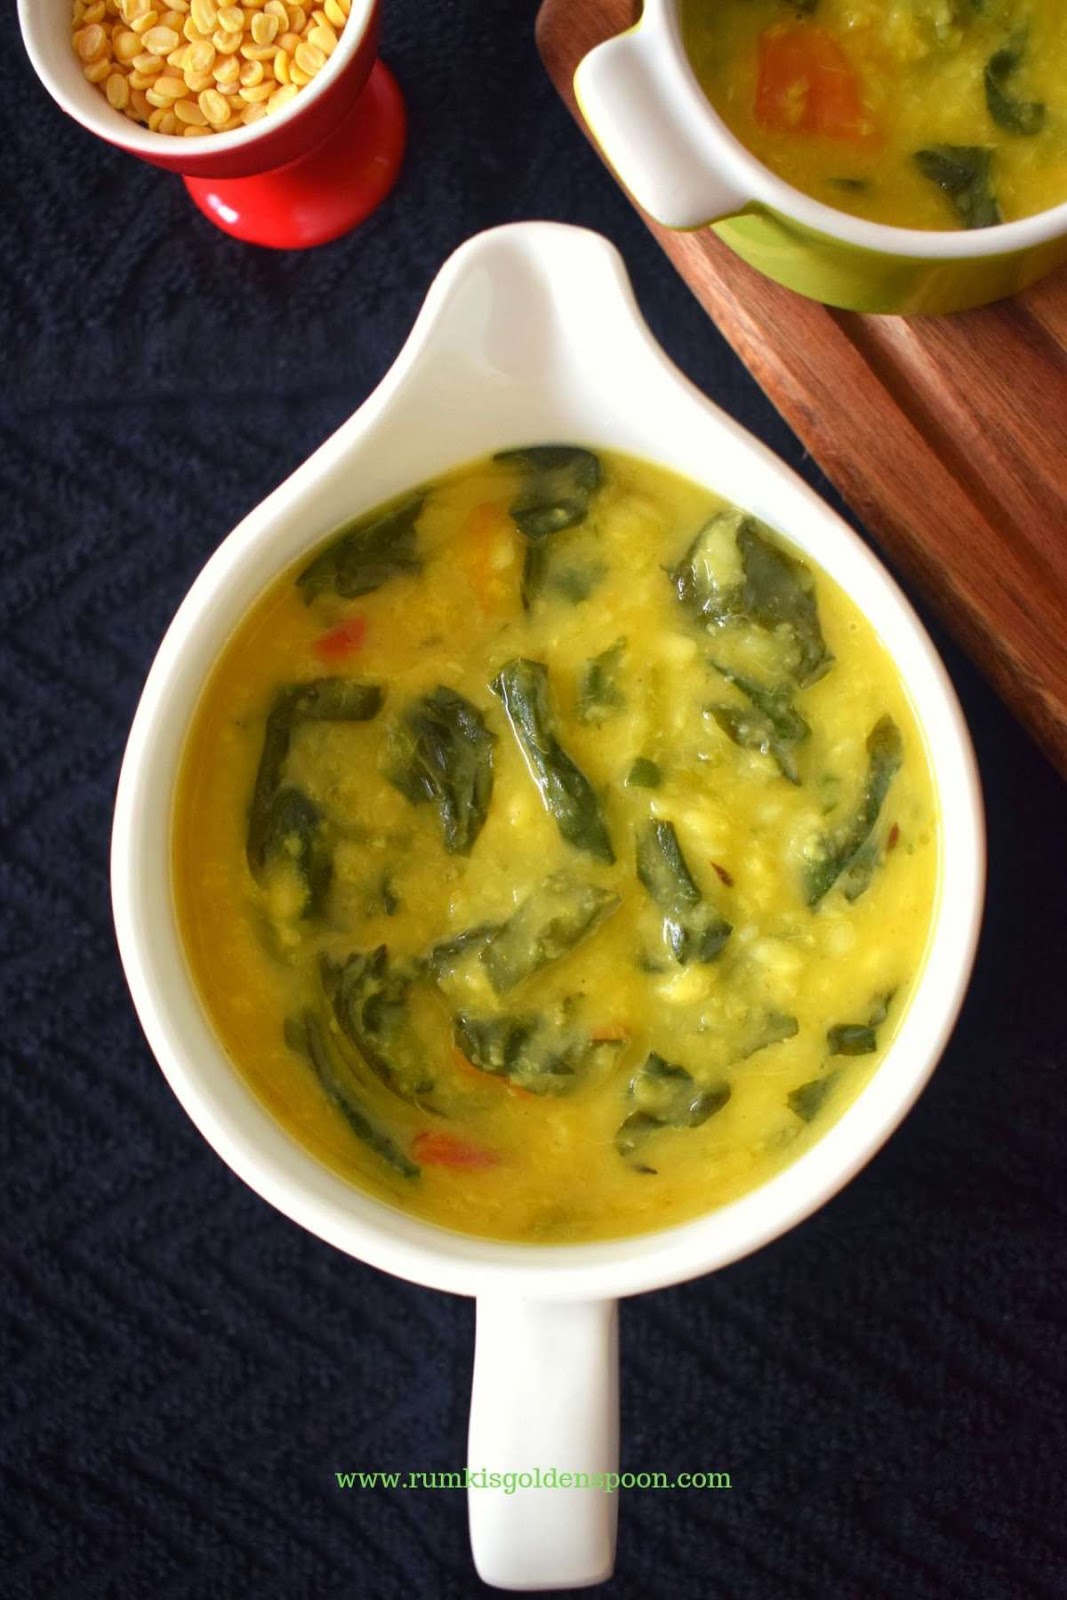 Moong dal palak, palak moong dal, spinach dal, indian dahl with spinach, dahl recipe, dal recipe, no onion no garlic recipes, palak with dal, dal palak, dal palak recipe, Moong dal palak recipe, palak dal, palak recipes, spinach recipes Indian, moong dal recipe, Rumki's Golden Spoon